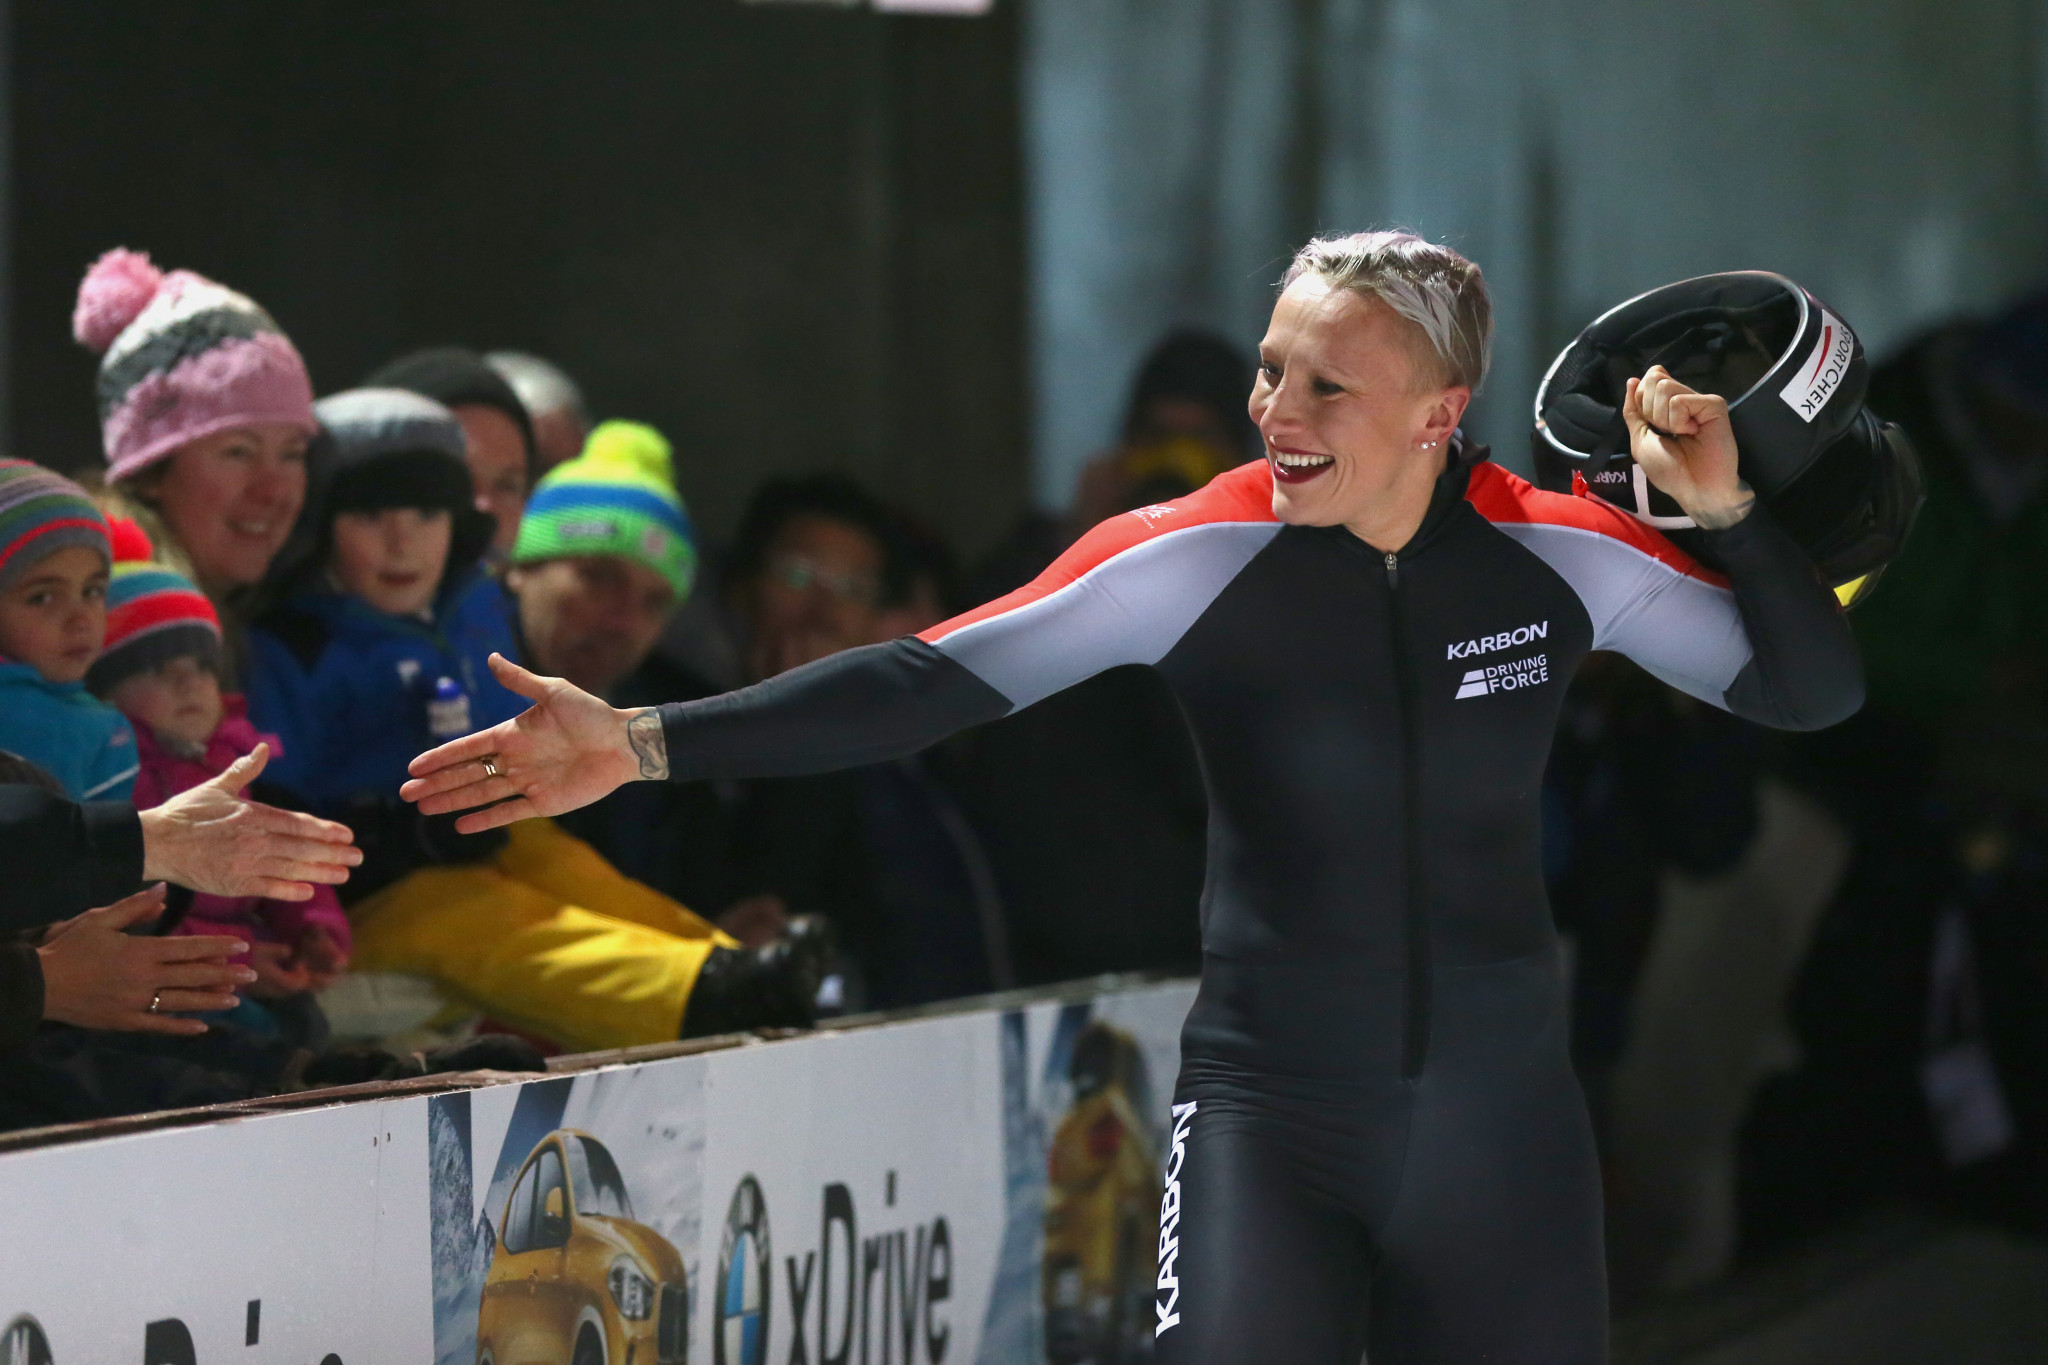 Double Olympic bobsleigh champion Kaillie Humphries says representing Canada was the greatest honour ©Getty Images